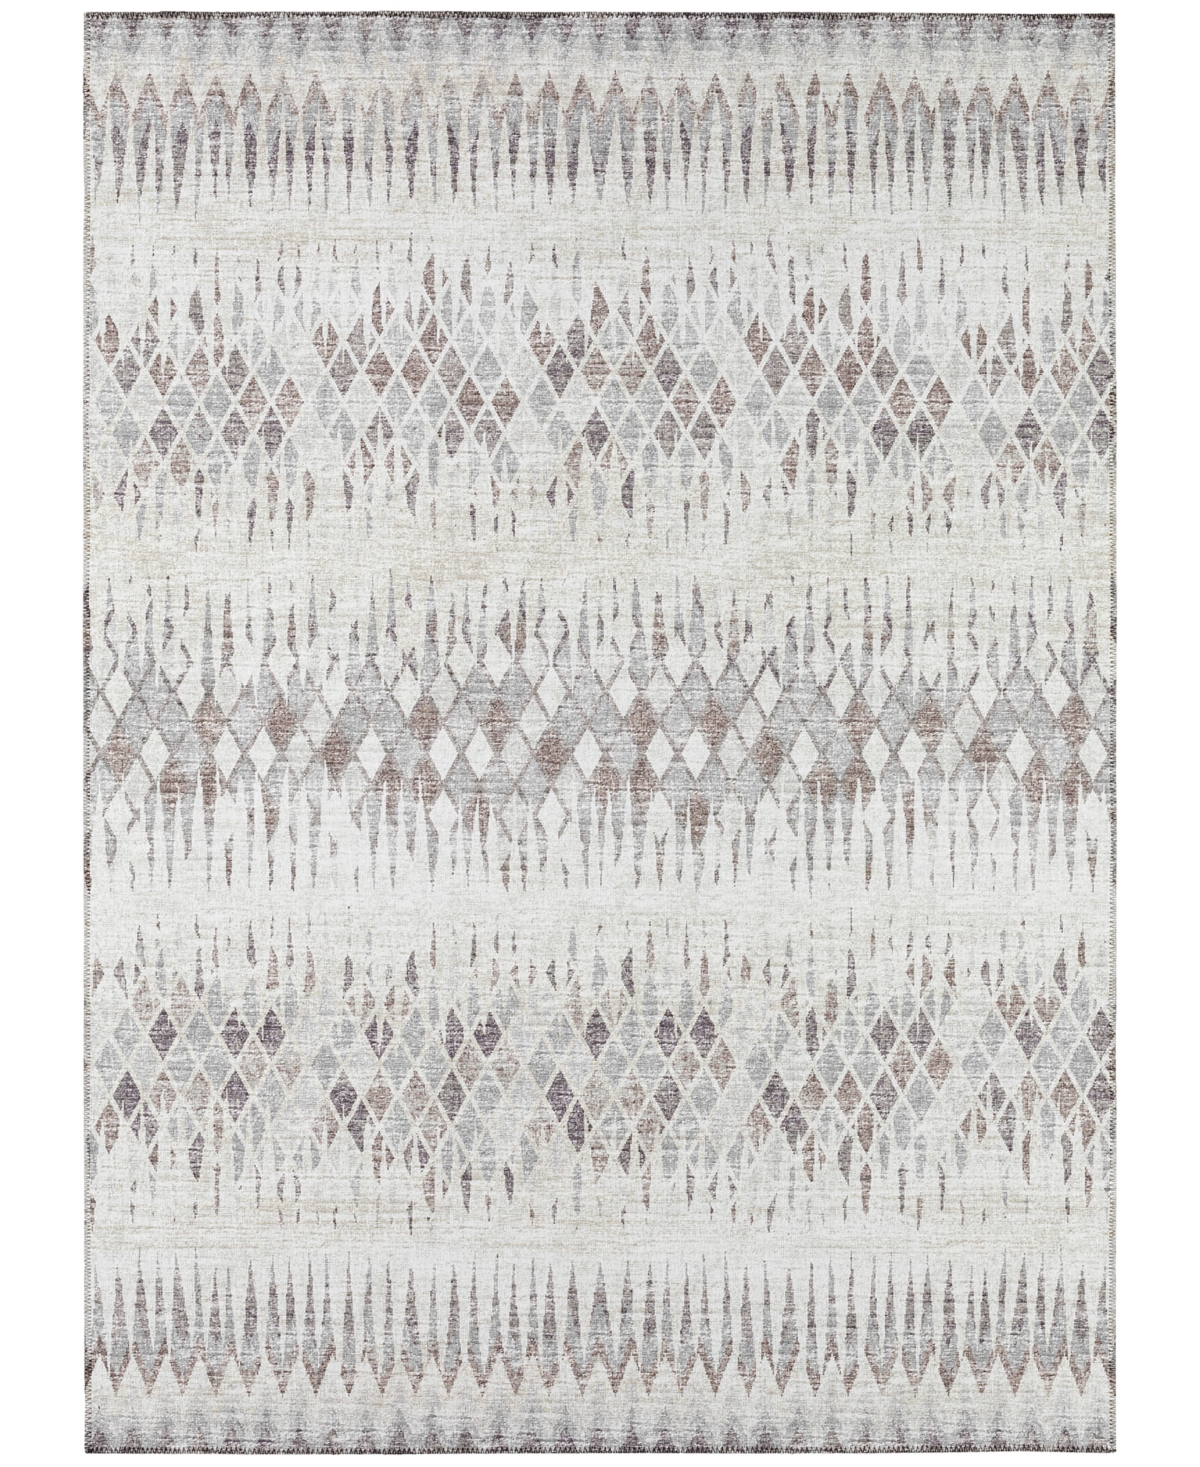 Addison Rylee Outdoor Washable ARY35 10' x 14' Area Rug - Beige